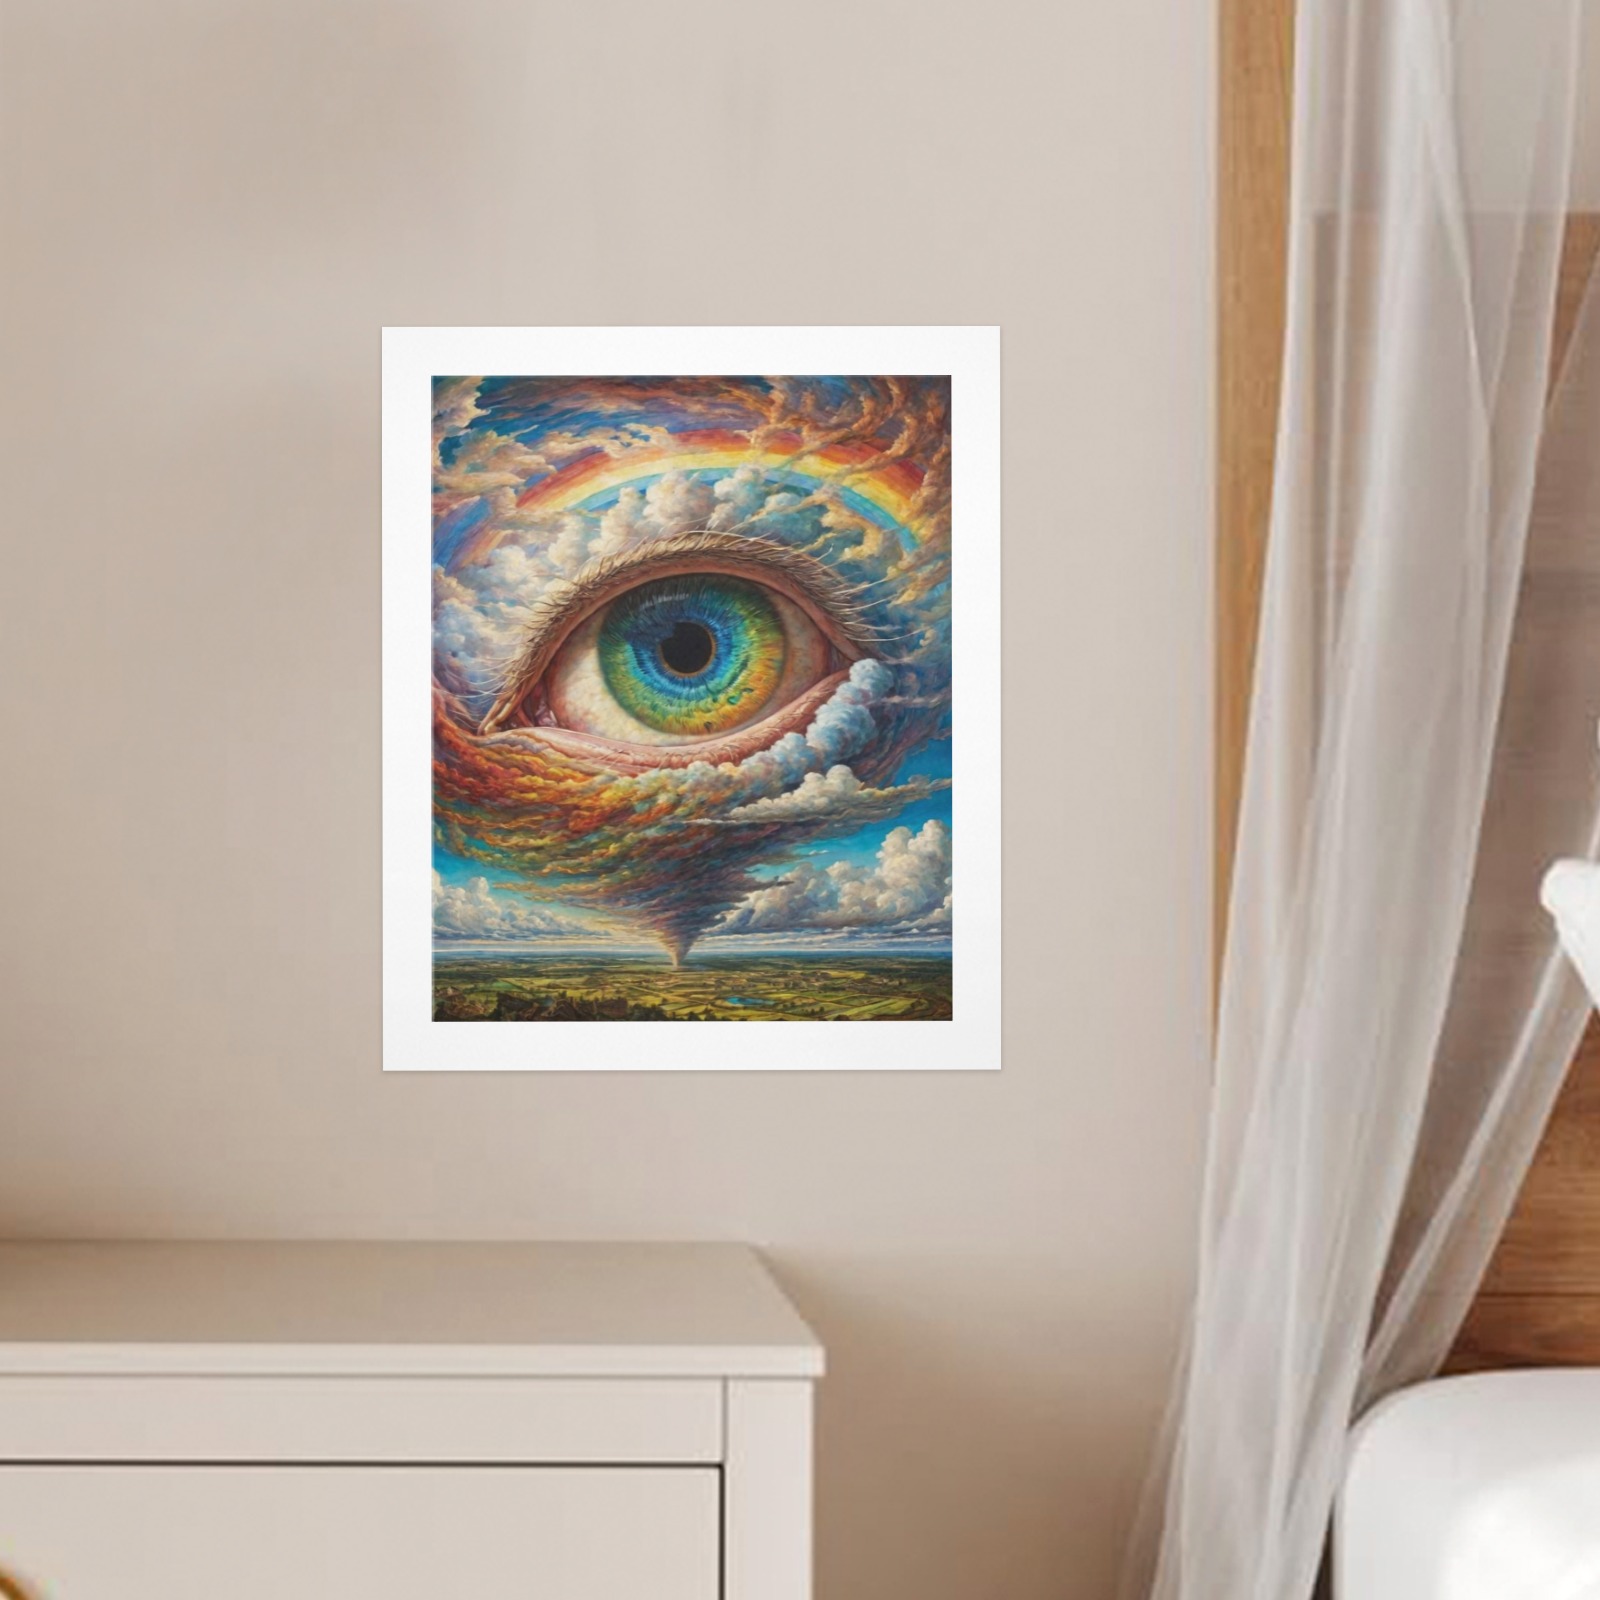 Eye Of The Storm Art Print 8"x10" (3 Pieces)